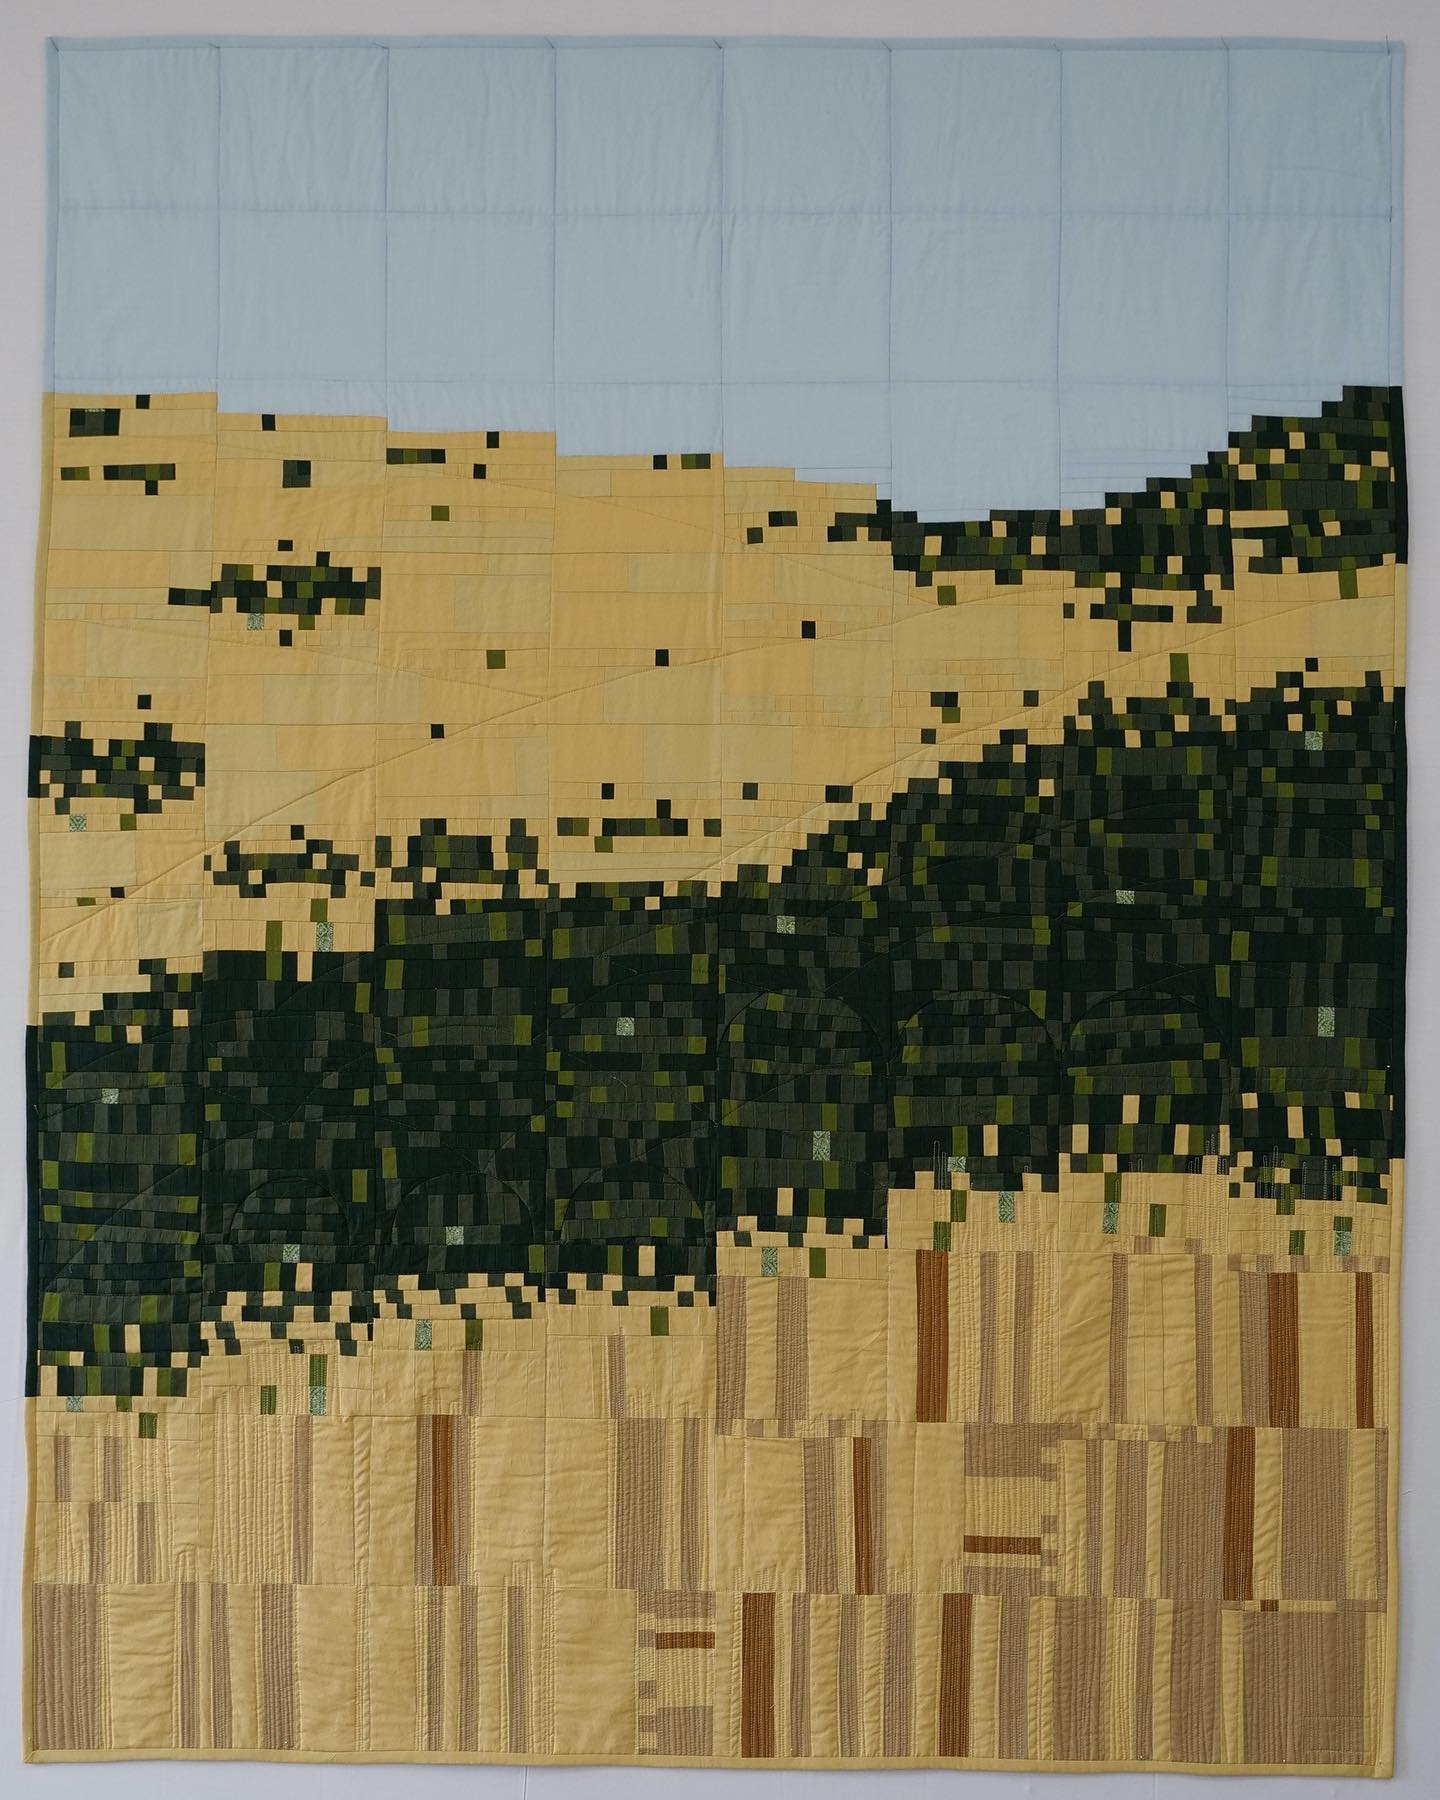 California Oak Woodland Quilt (49&rdquo; x 61&rdquo; | fabric | 2023) 

My photograph for this quilt was shot midsummer in Paso Robles, California where I intentionally scouted out various oak-y locations in anticipation for this project. Native oaks